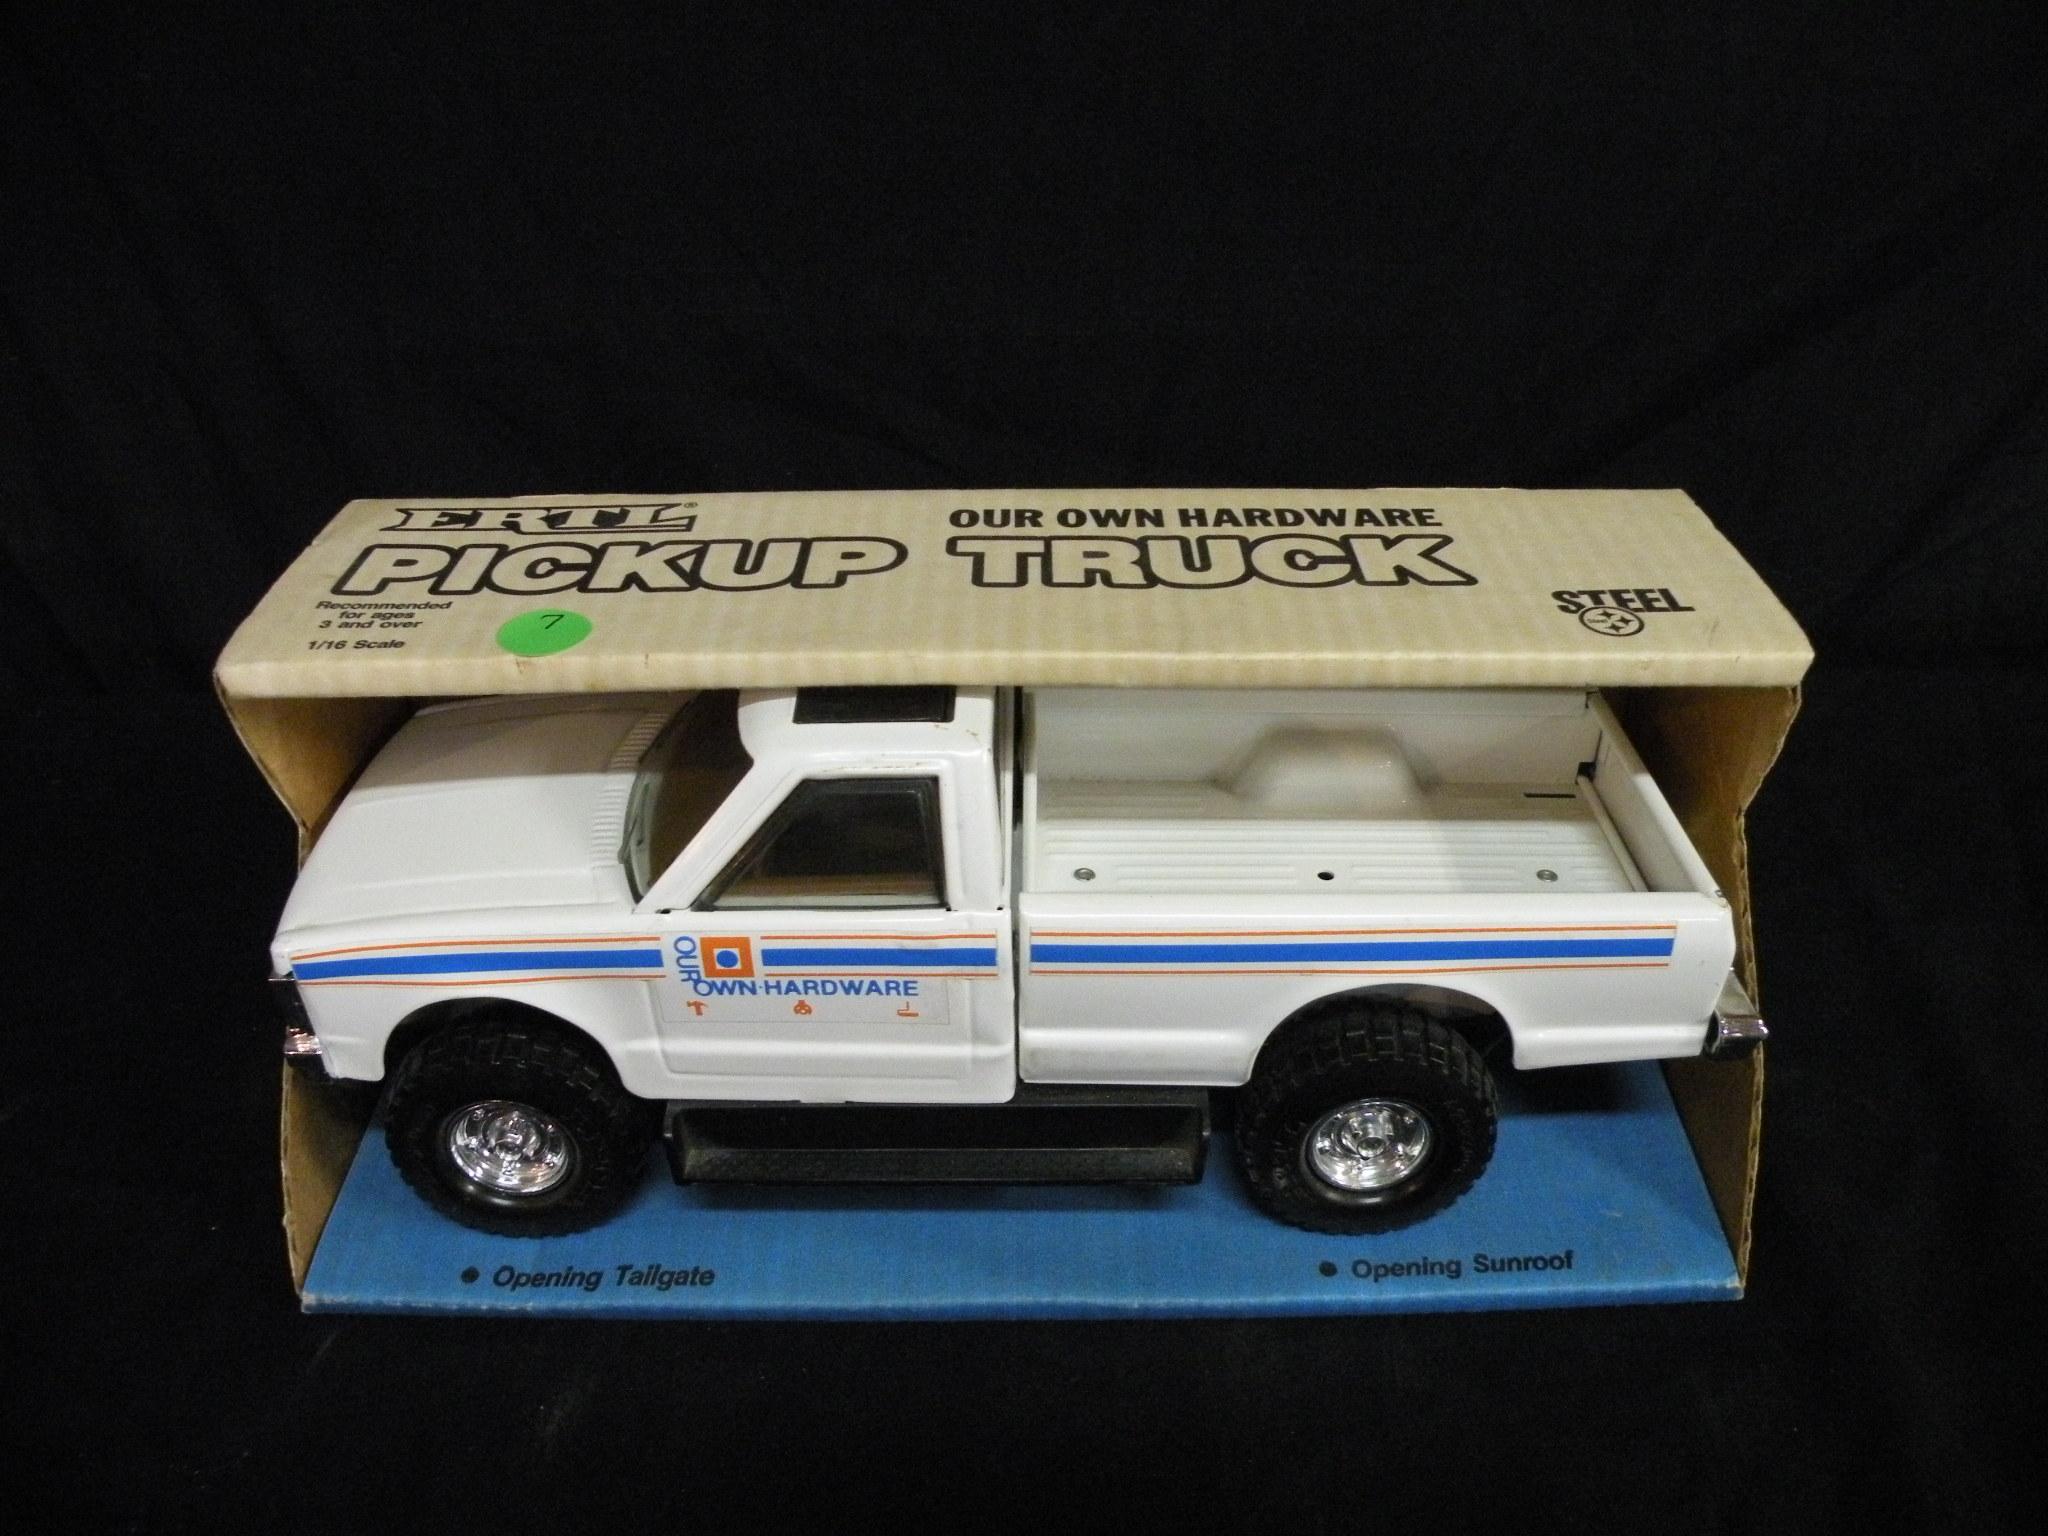 1988 ERTL STEEL 1/16 OUR OWN HARDWARE PICKUP TRUCK TOY W/BOX